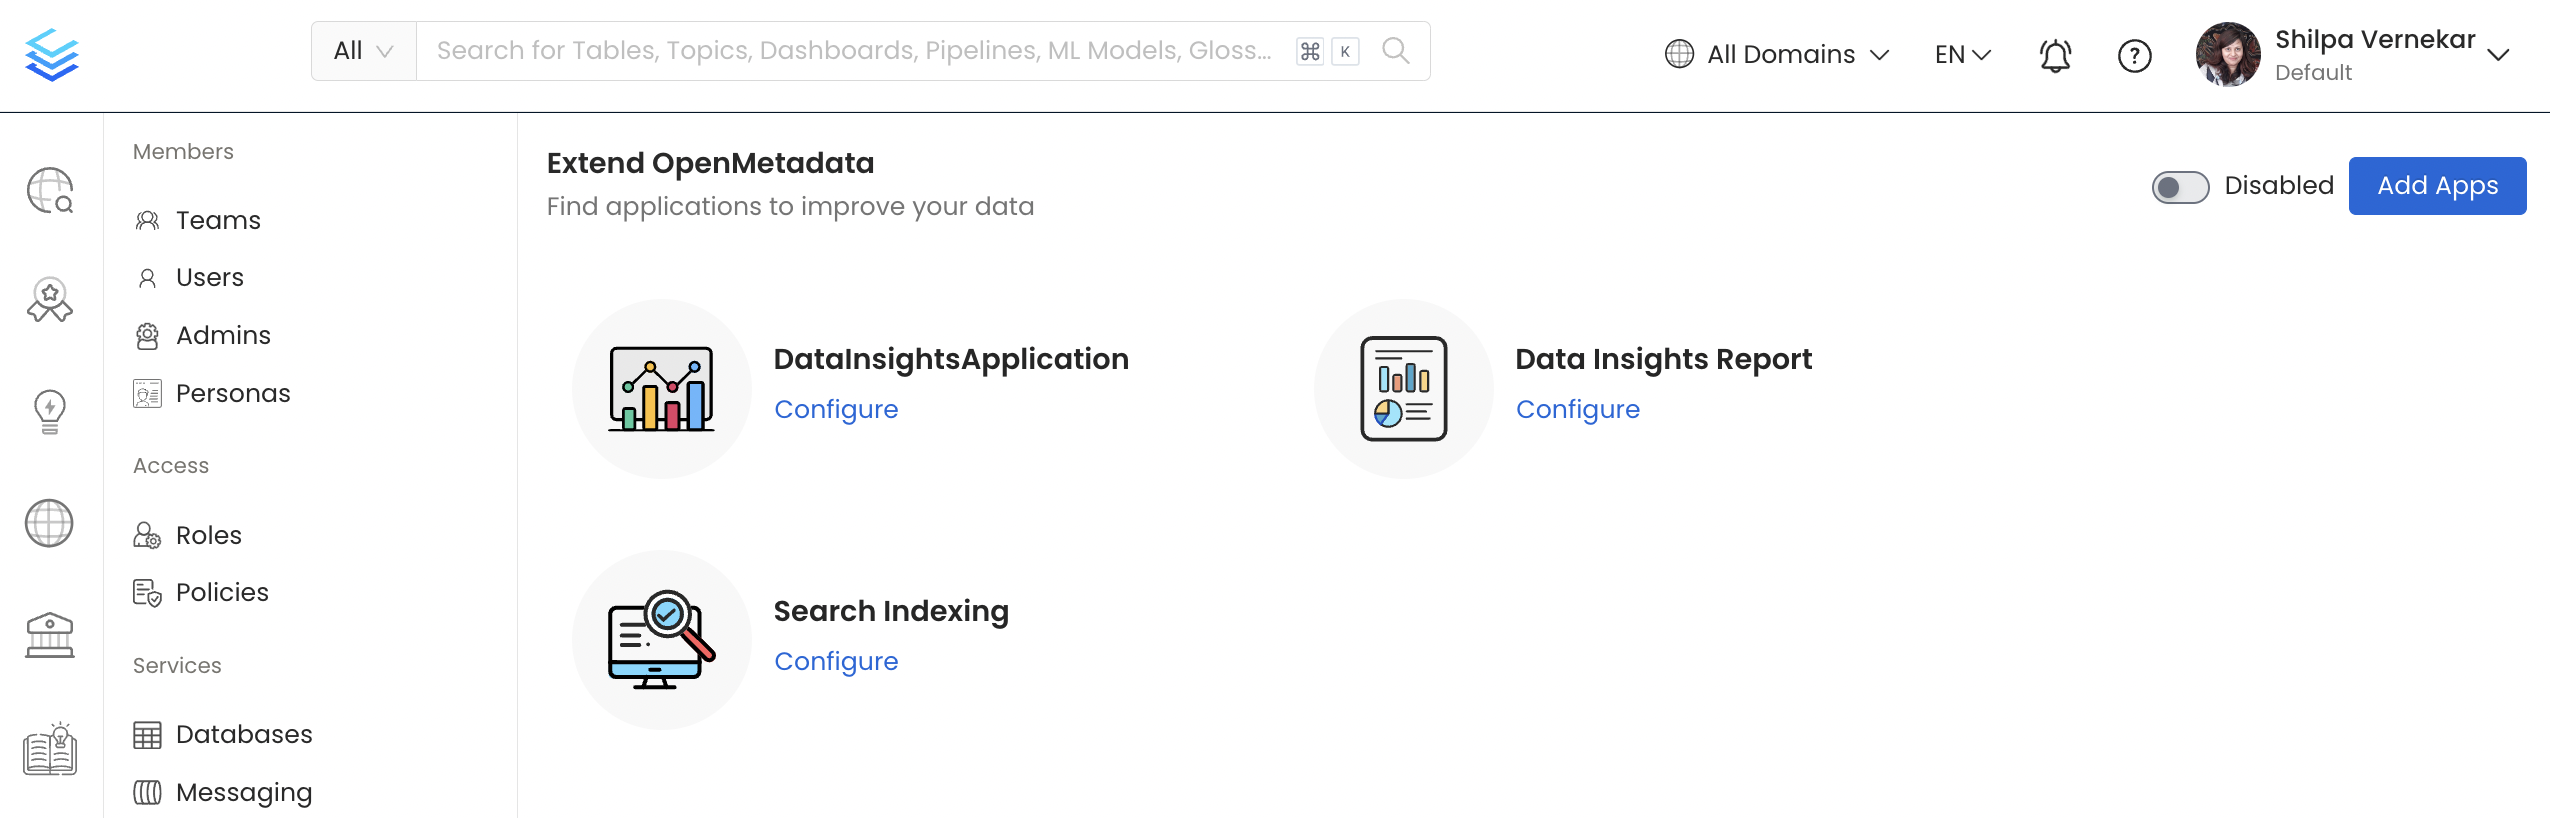 Configured the Data Insights Report